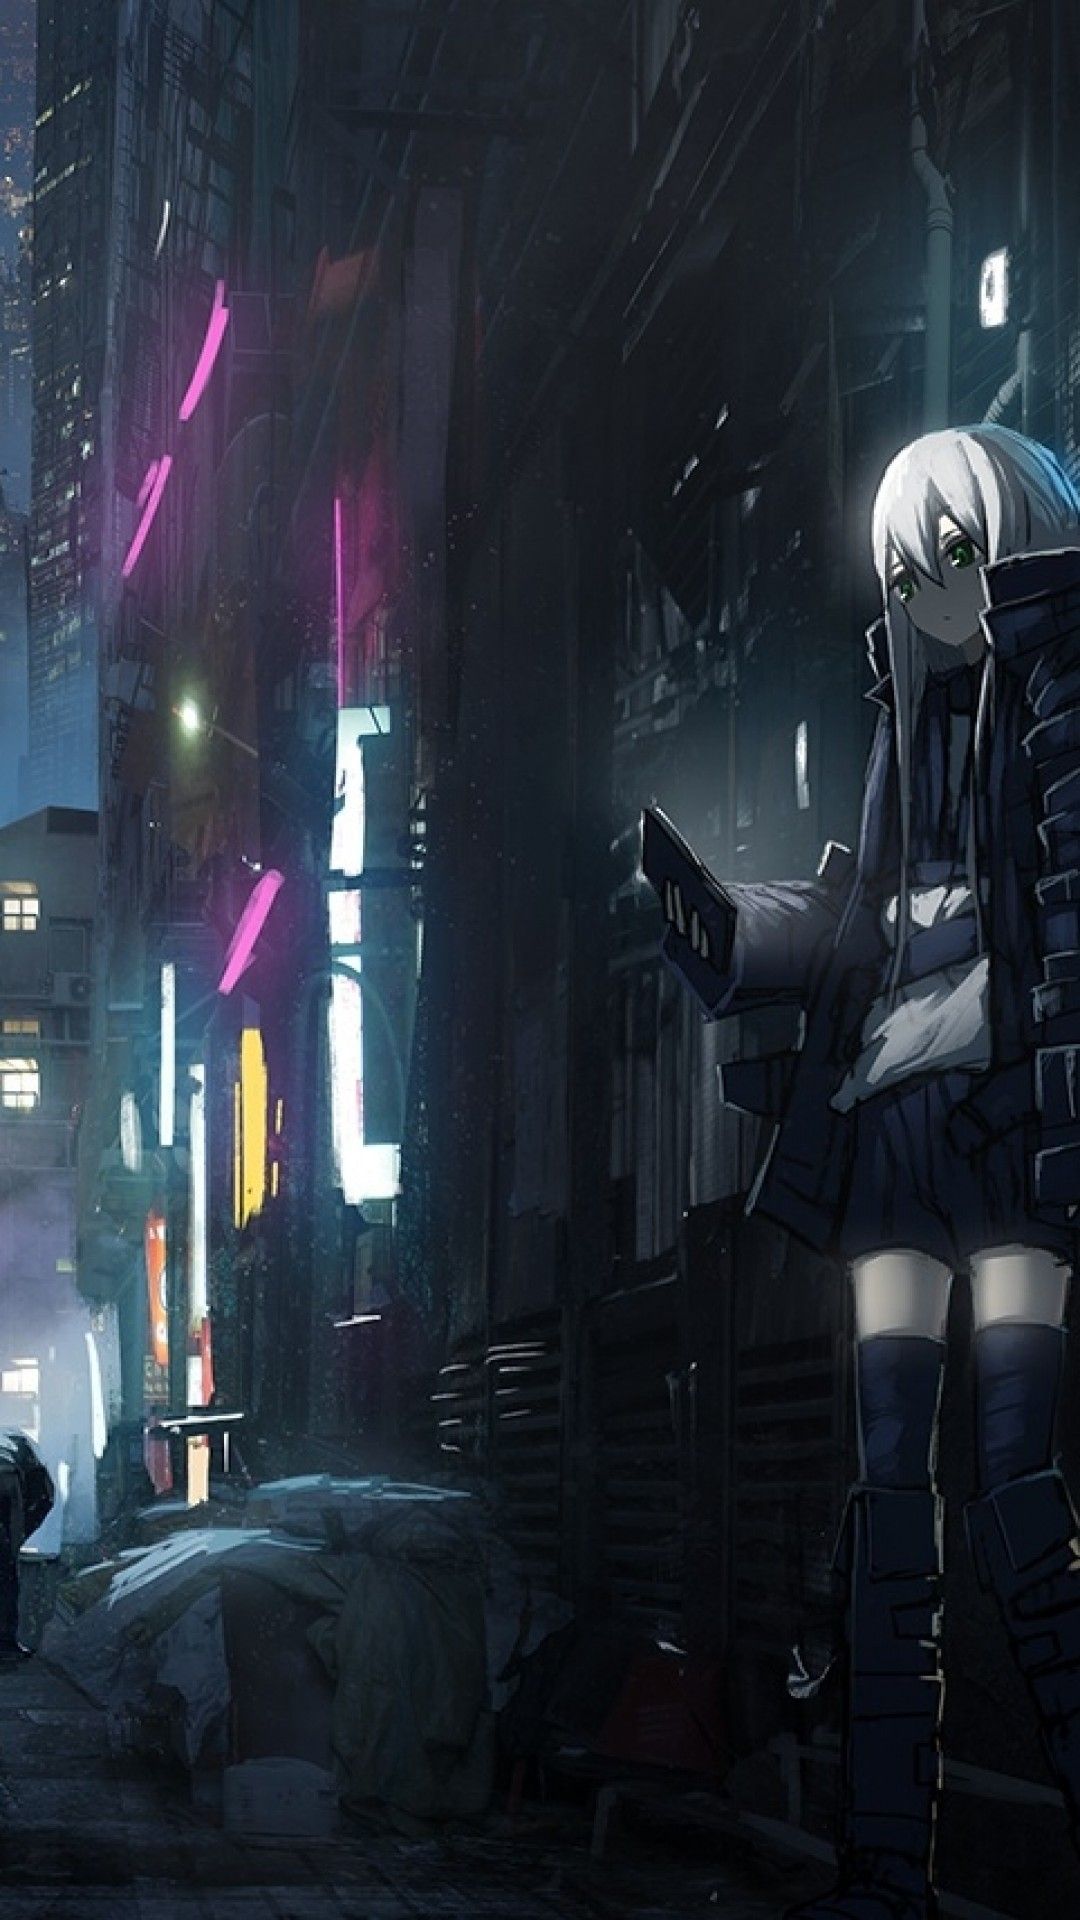 Download 1080x1920 Anime Dark City, Skyscrapers, Back Streets, Girl, People, Neon Lights Wallpaper for iPhone iPhone 7 Plus, iPhone 6+, Sony Xperia Z, HTC One